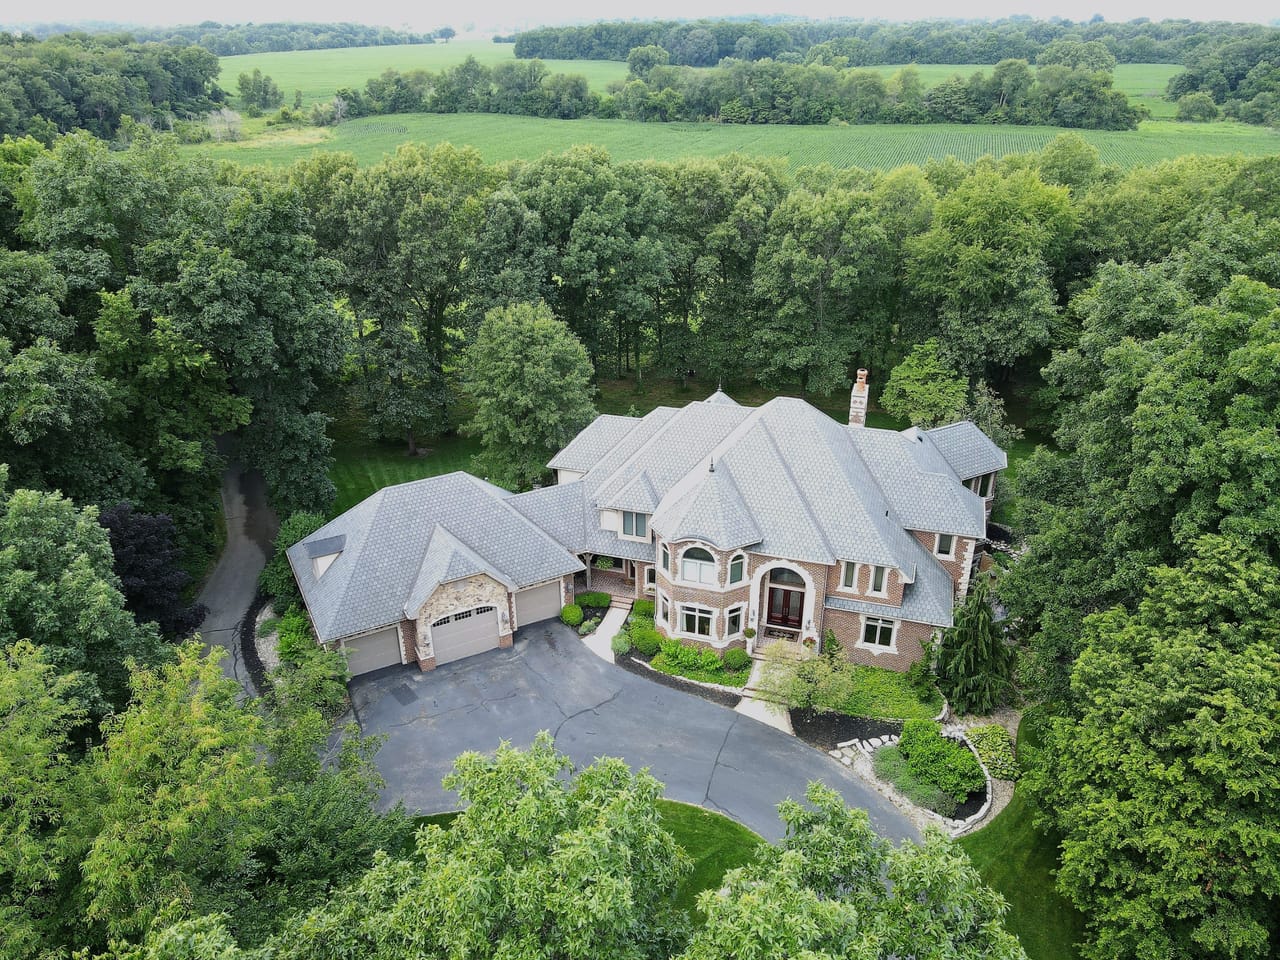 26201 Madison Rd North Liberty, IN 46530 / 20 +/- acres / 8,687 Sq Ft 7 Beds, 4.5 Bath / Pool House/Pool / Pond / Land for Sale